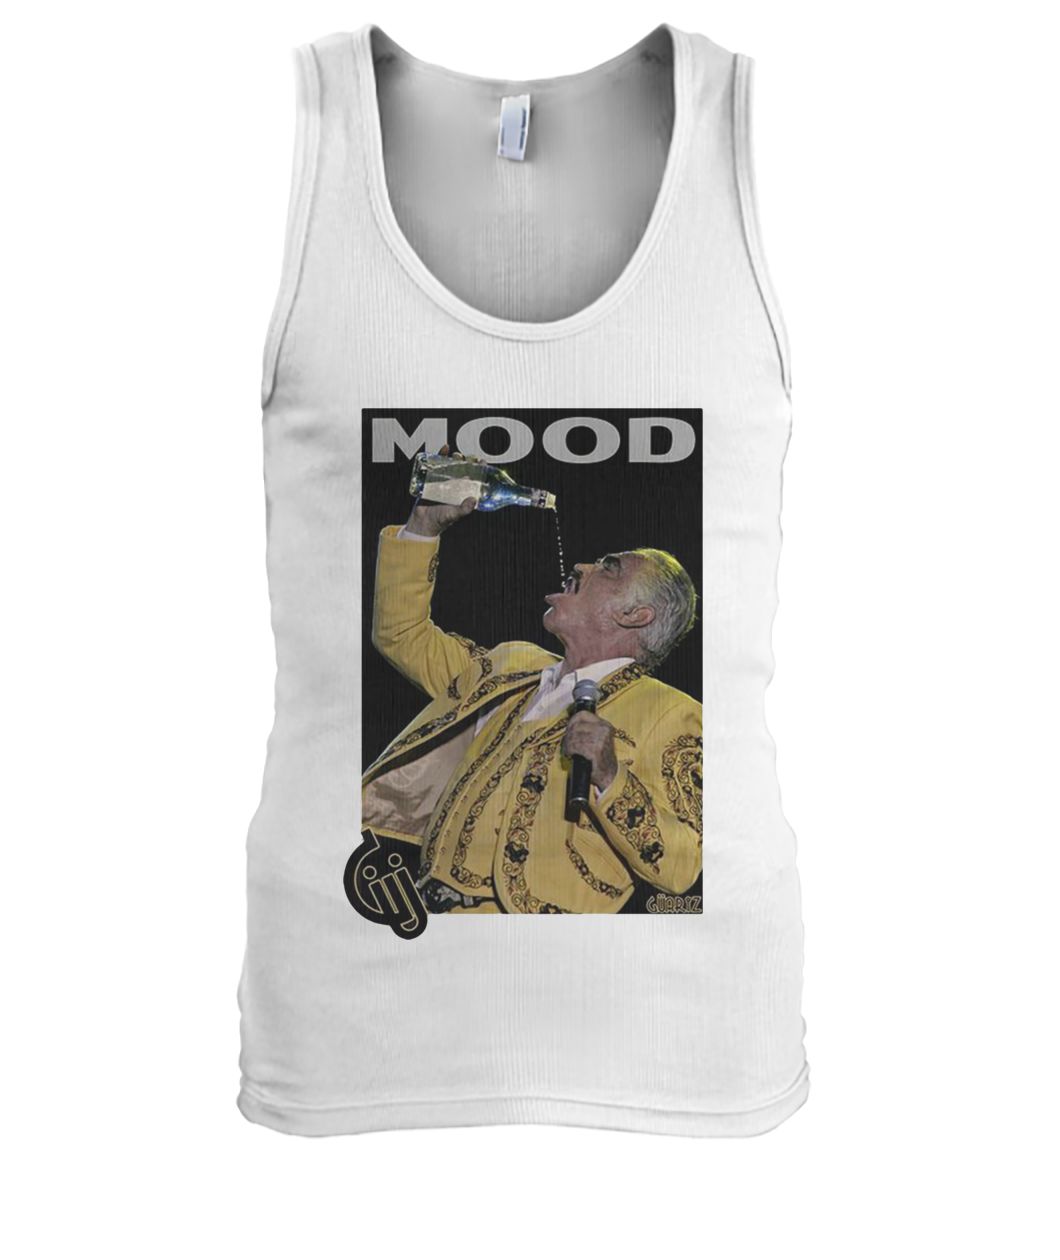 Vicente fernández drinking and singing mood men's tank top